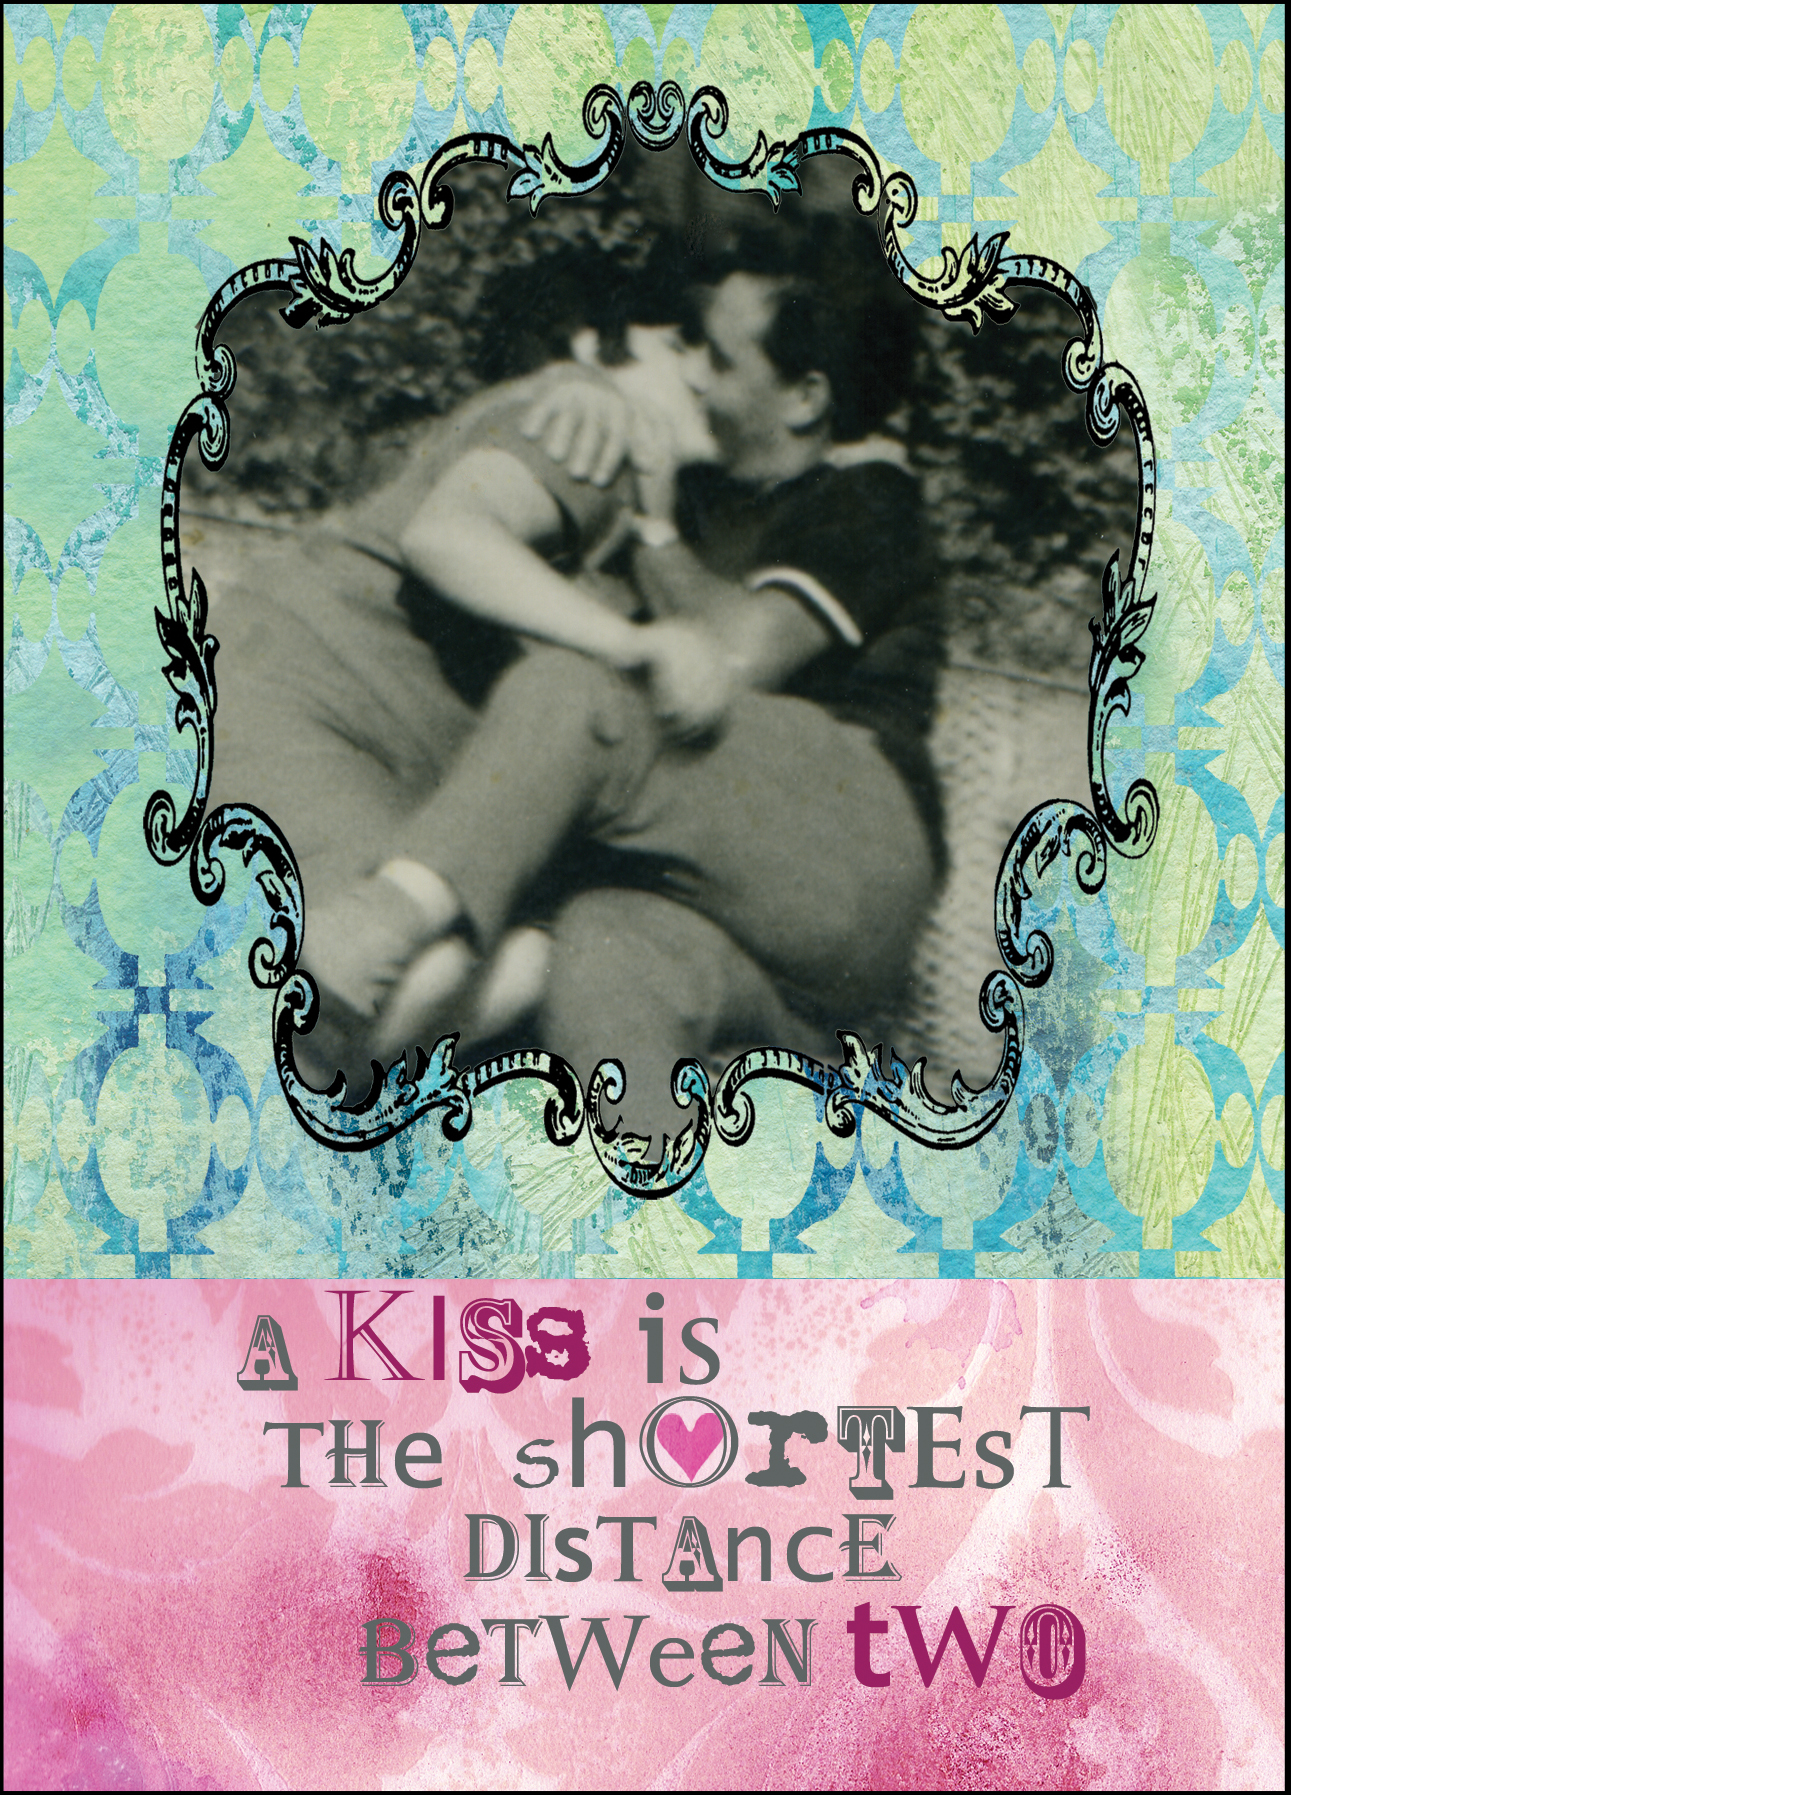 Gabriela Szulman romatic greeting card "a kiss is the shortest distance between two" collage photograph couple kissing